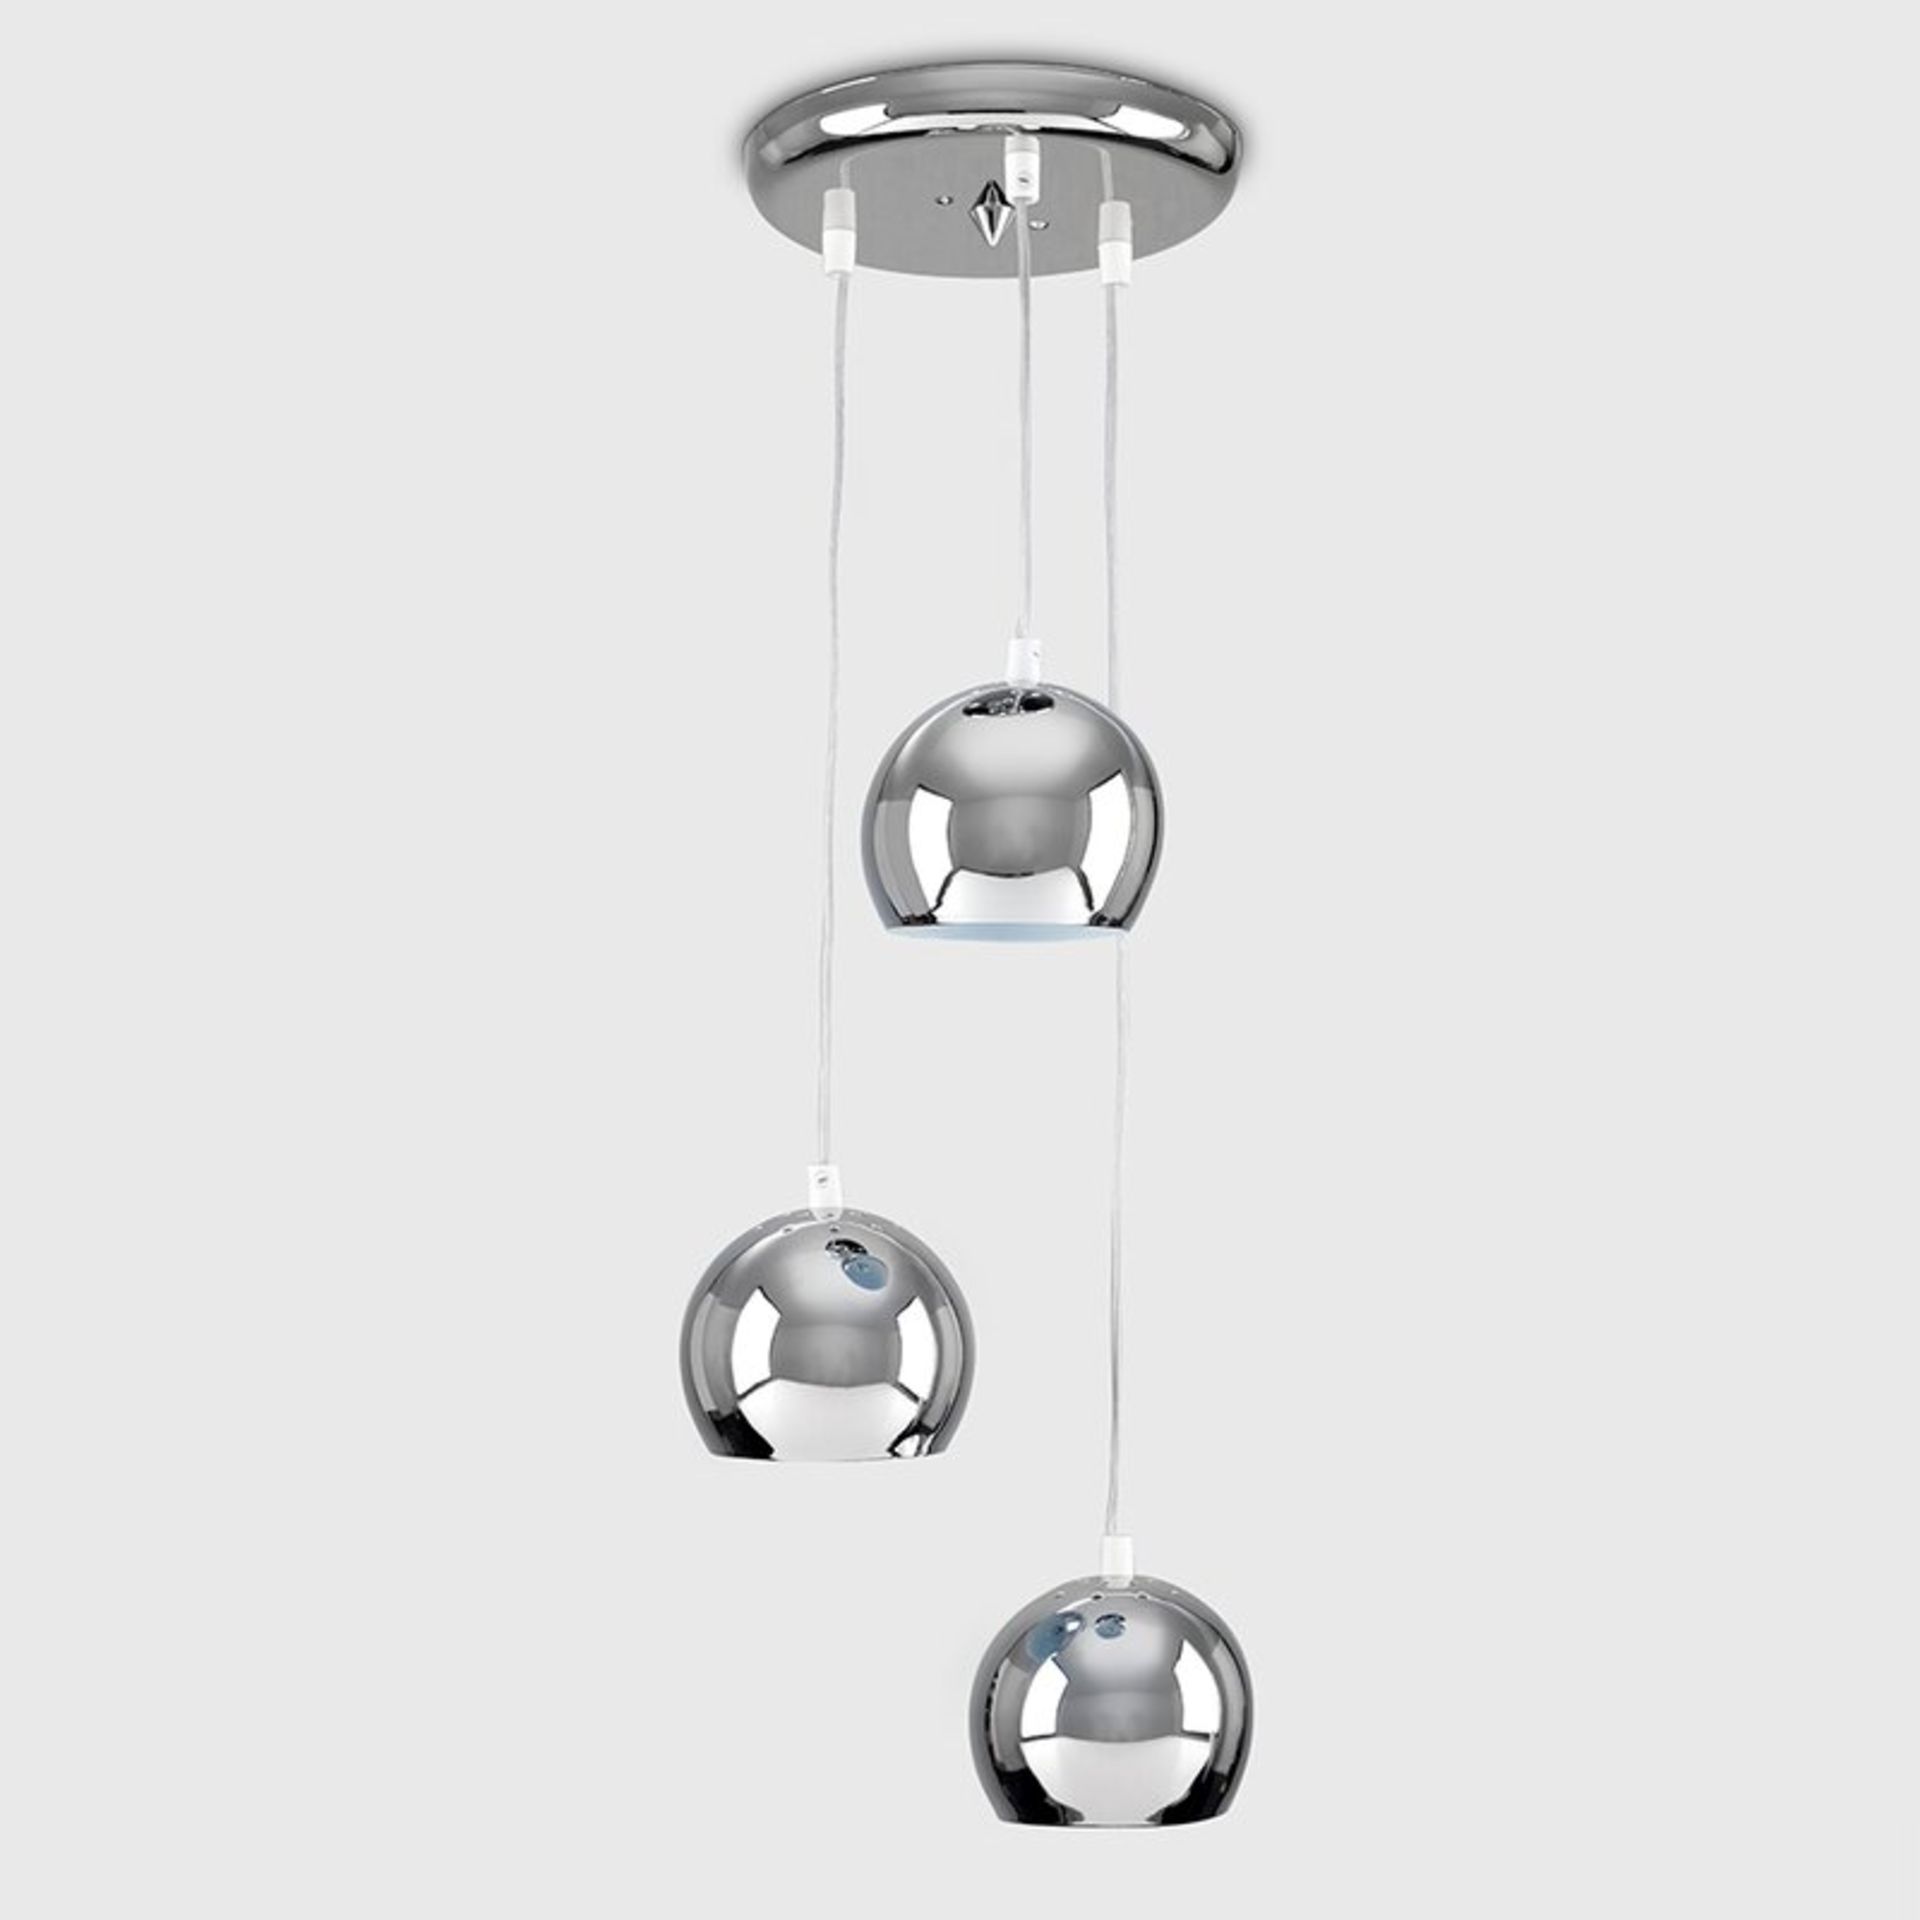 Kerry 3-Light Cluster Pendant - RRP £59.99. - Image 4 of 5